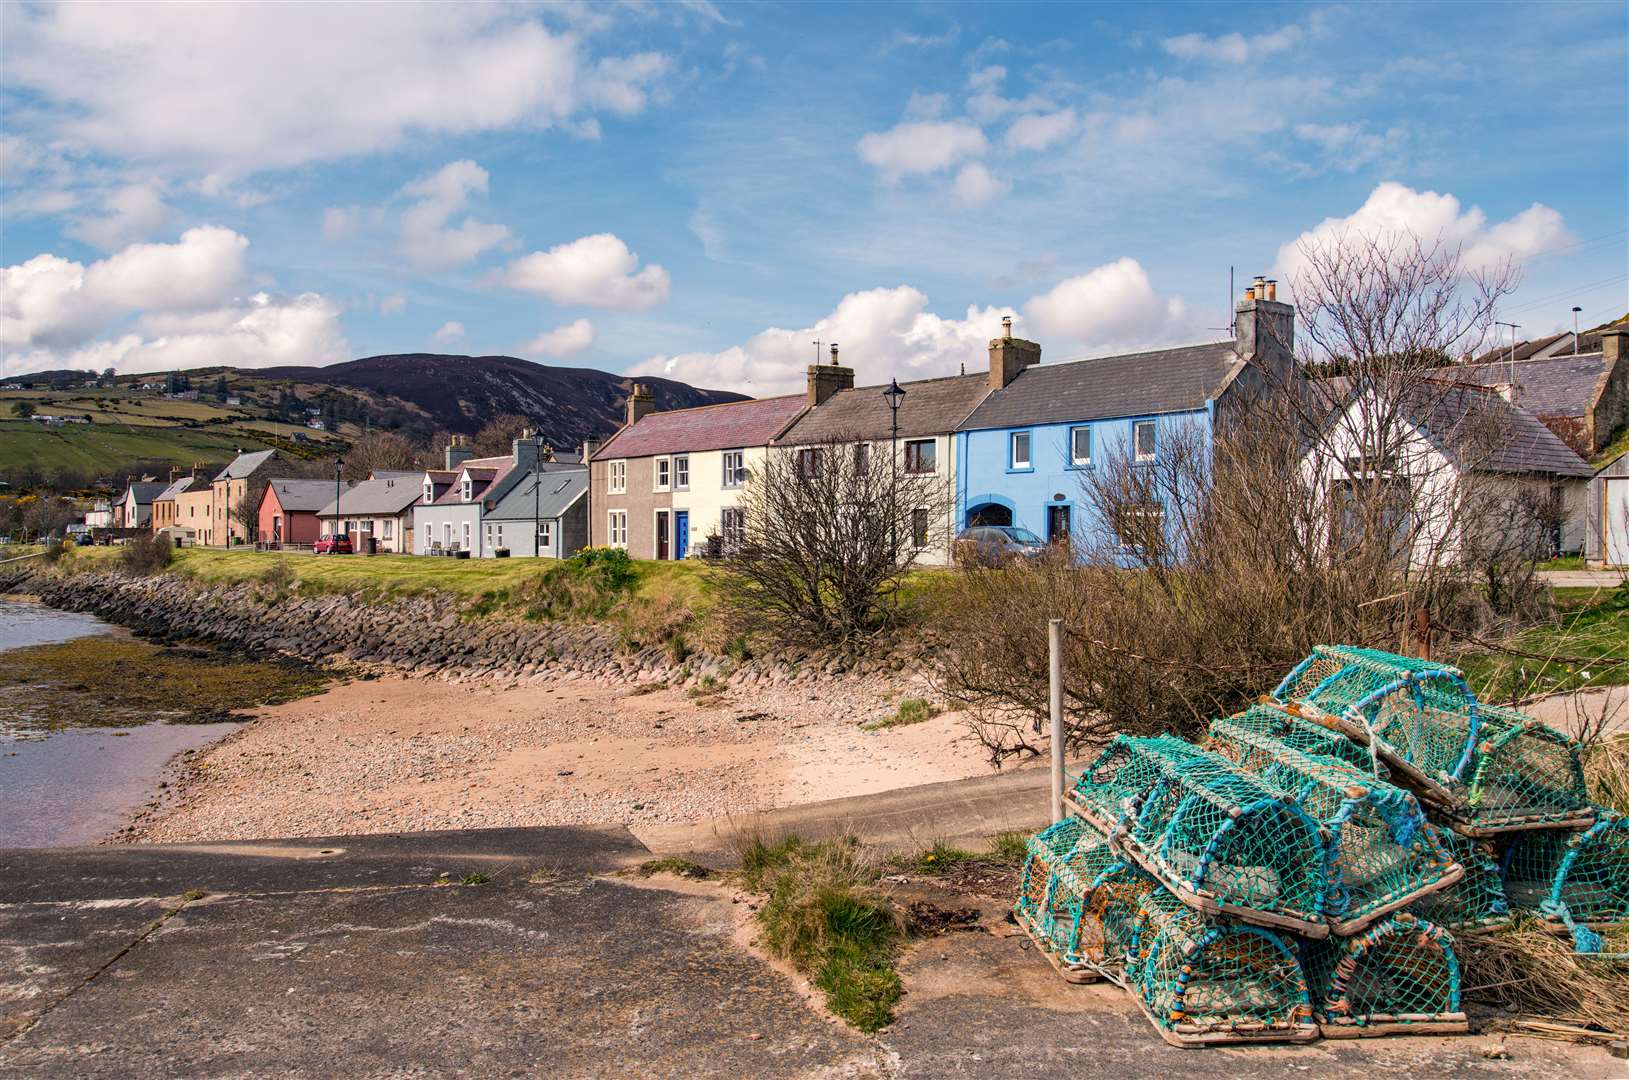 The walking tour of Helmsdale will explore the stories behind its place names and their origins.